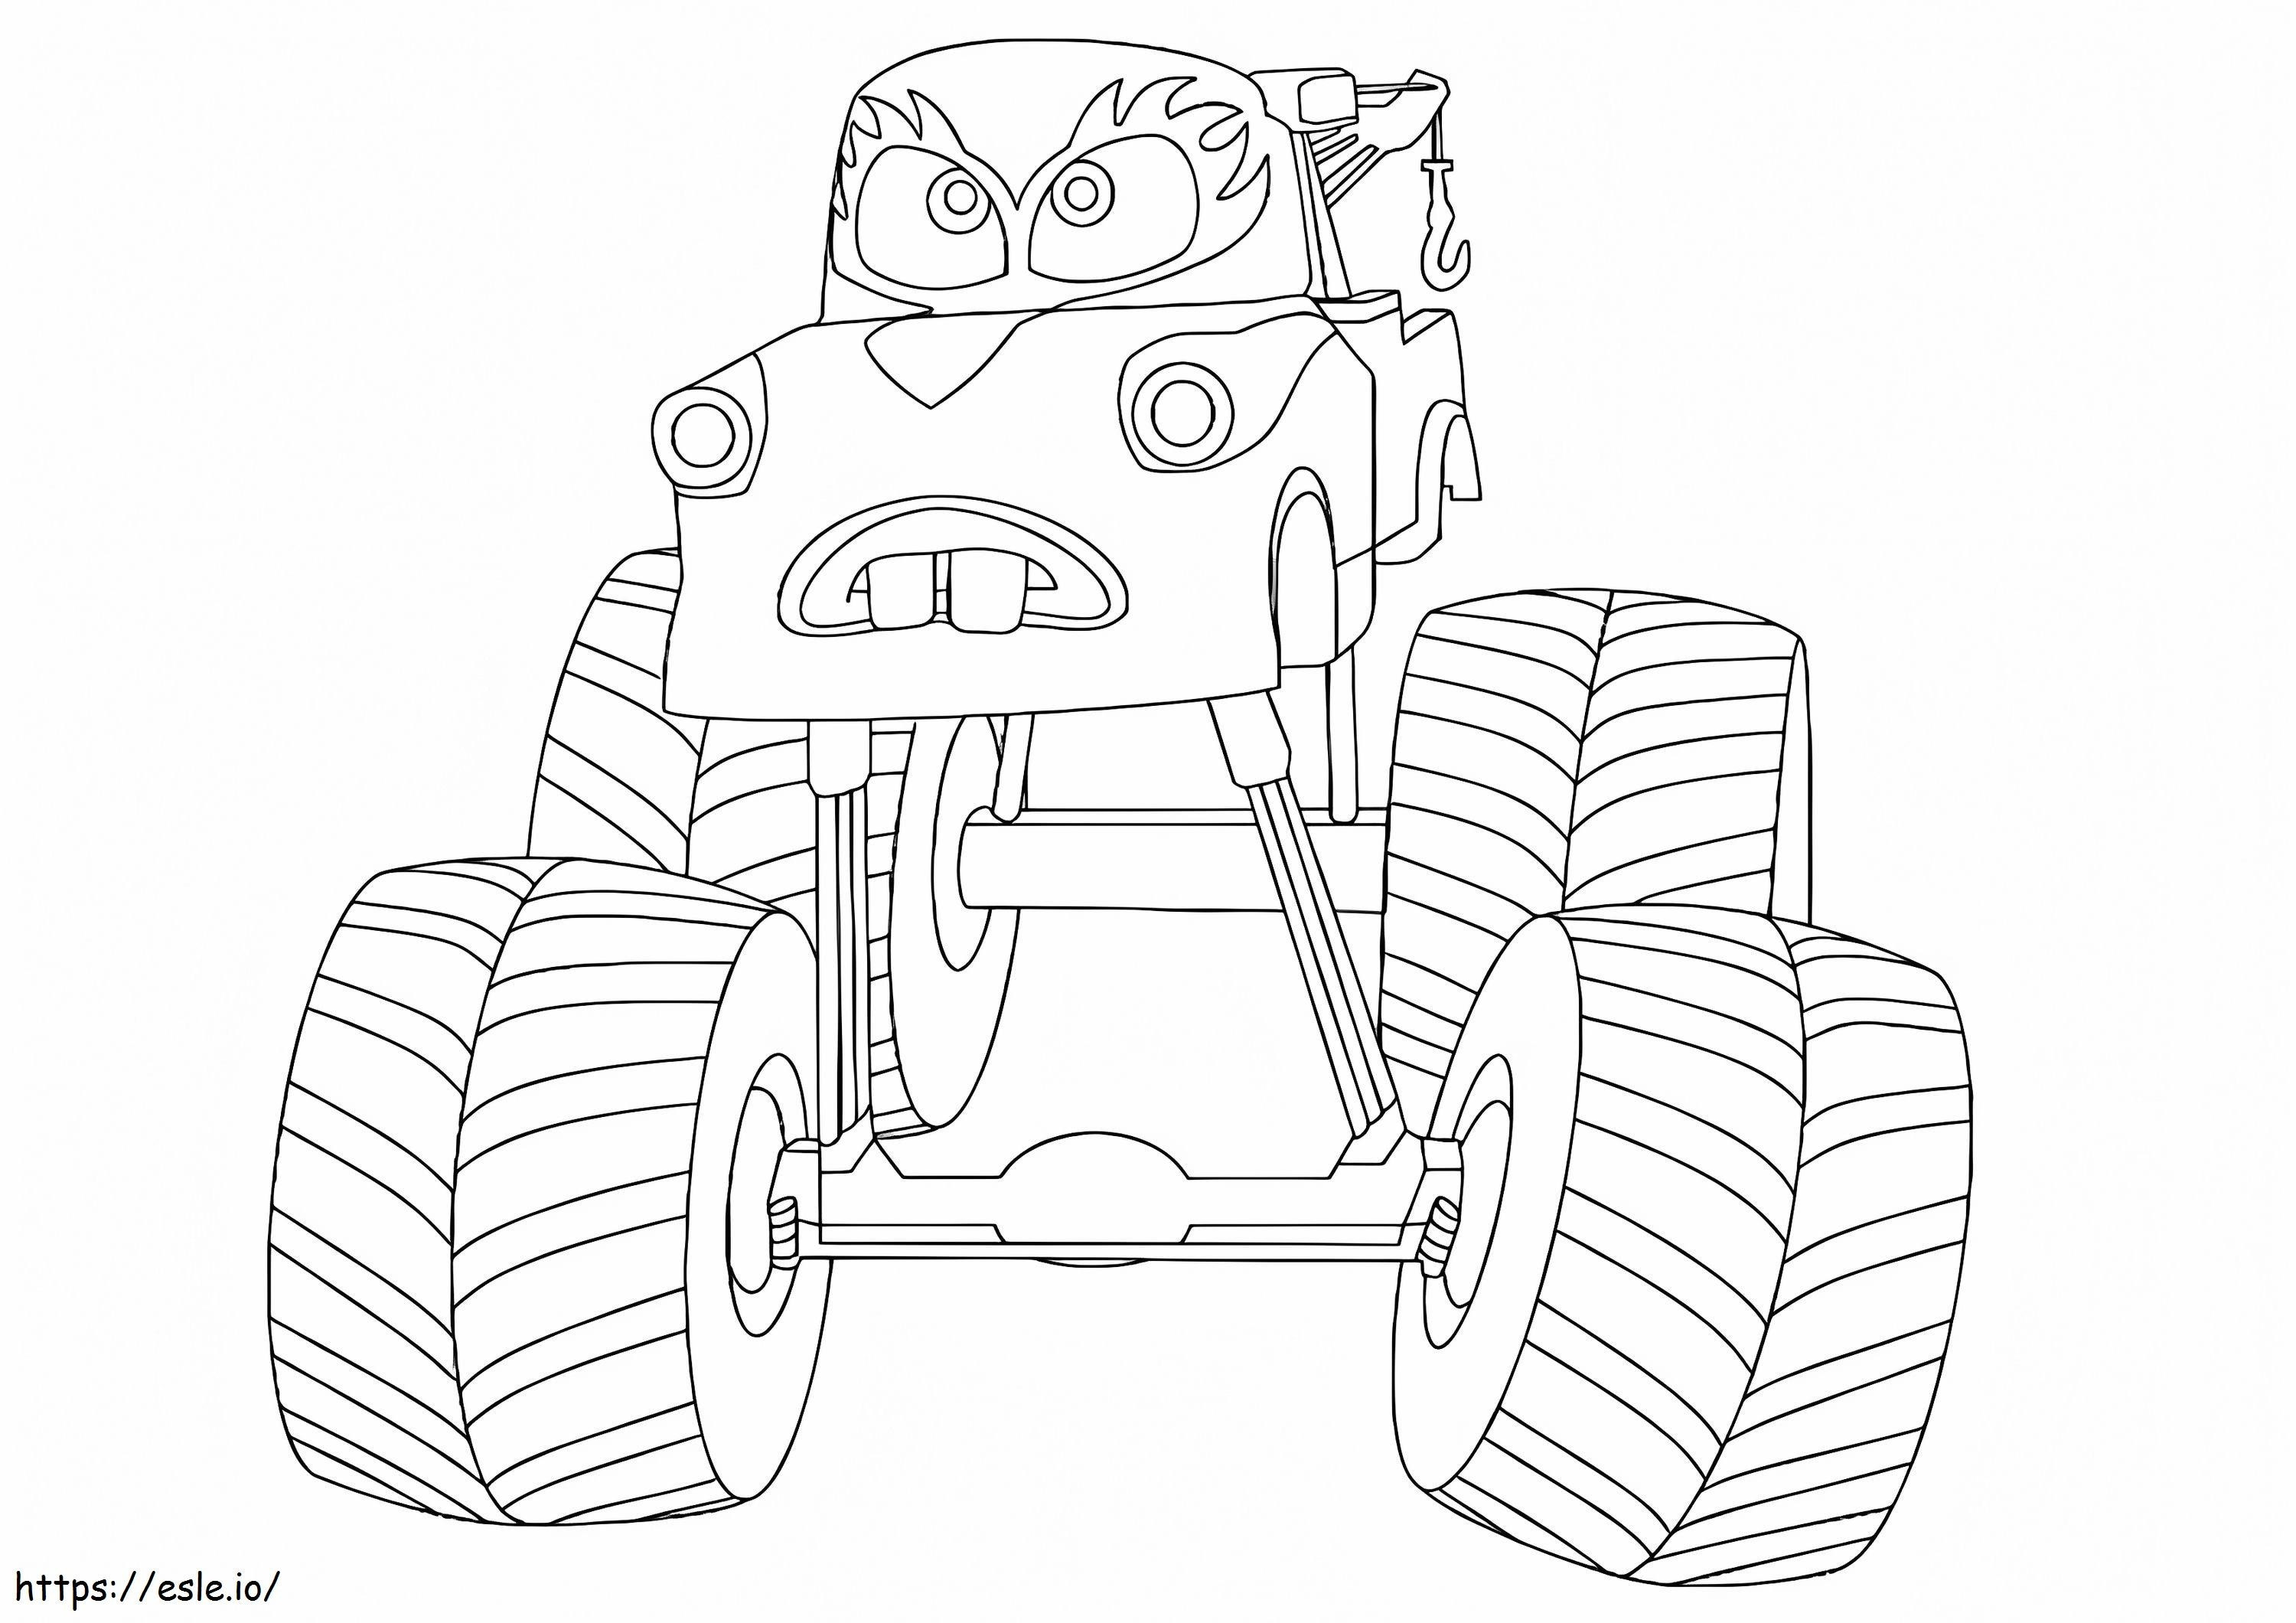 Monster Truck Coloring Pages Blaze  Carros para colorir, Monster truck,  Desenhos para colorir carros